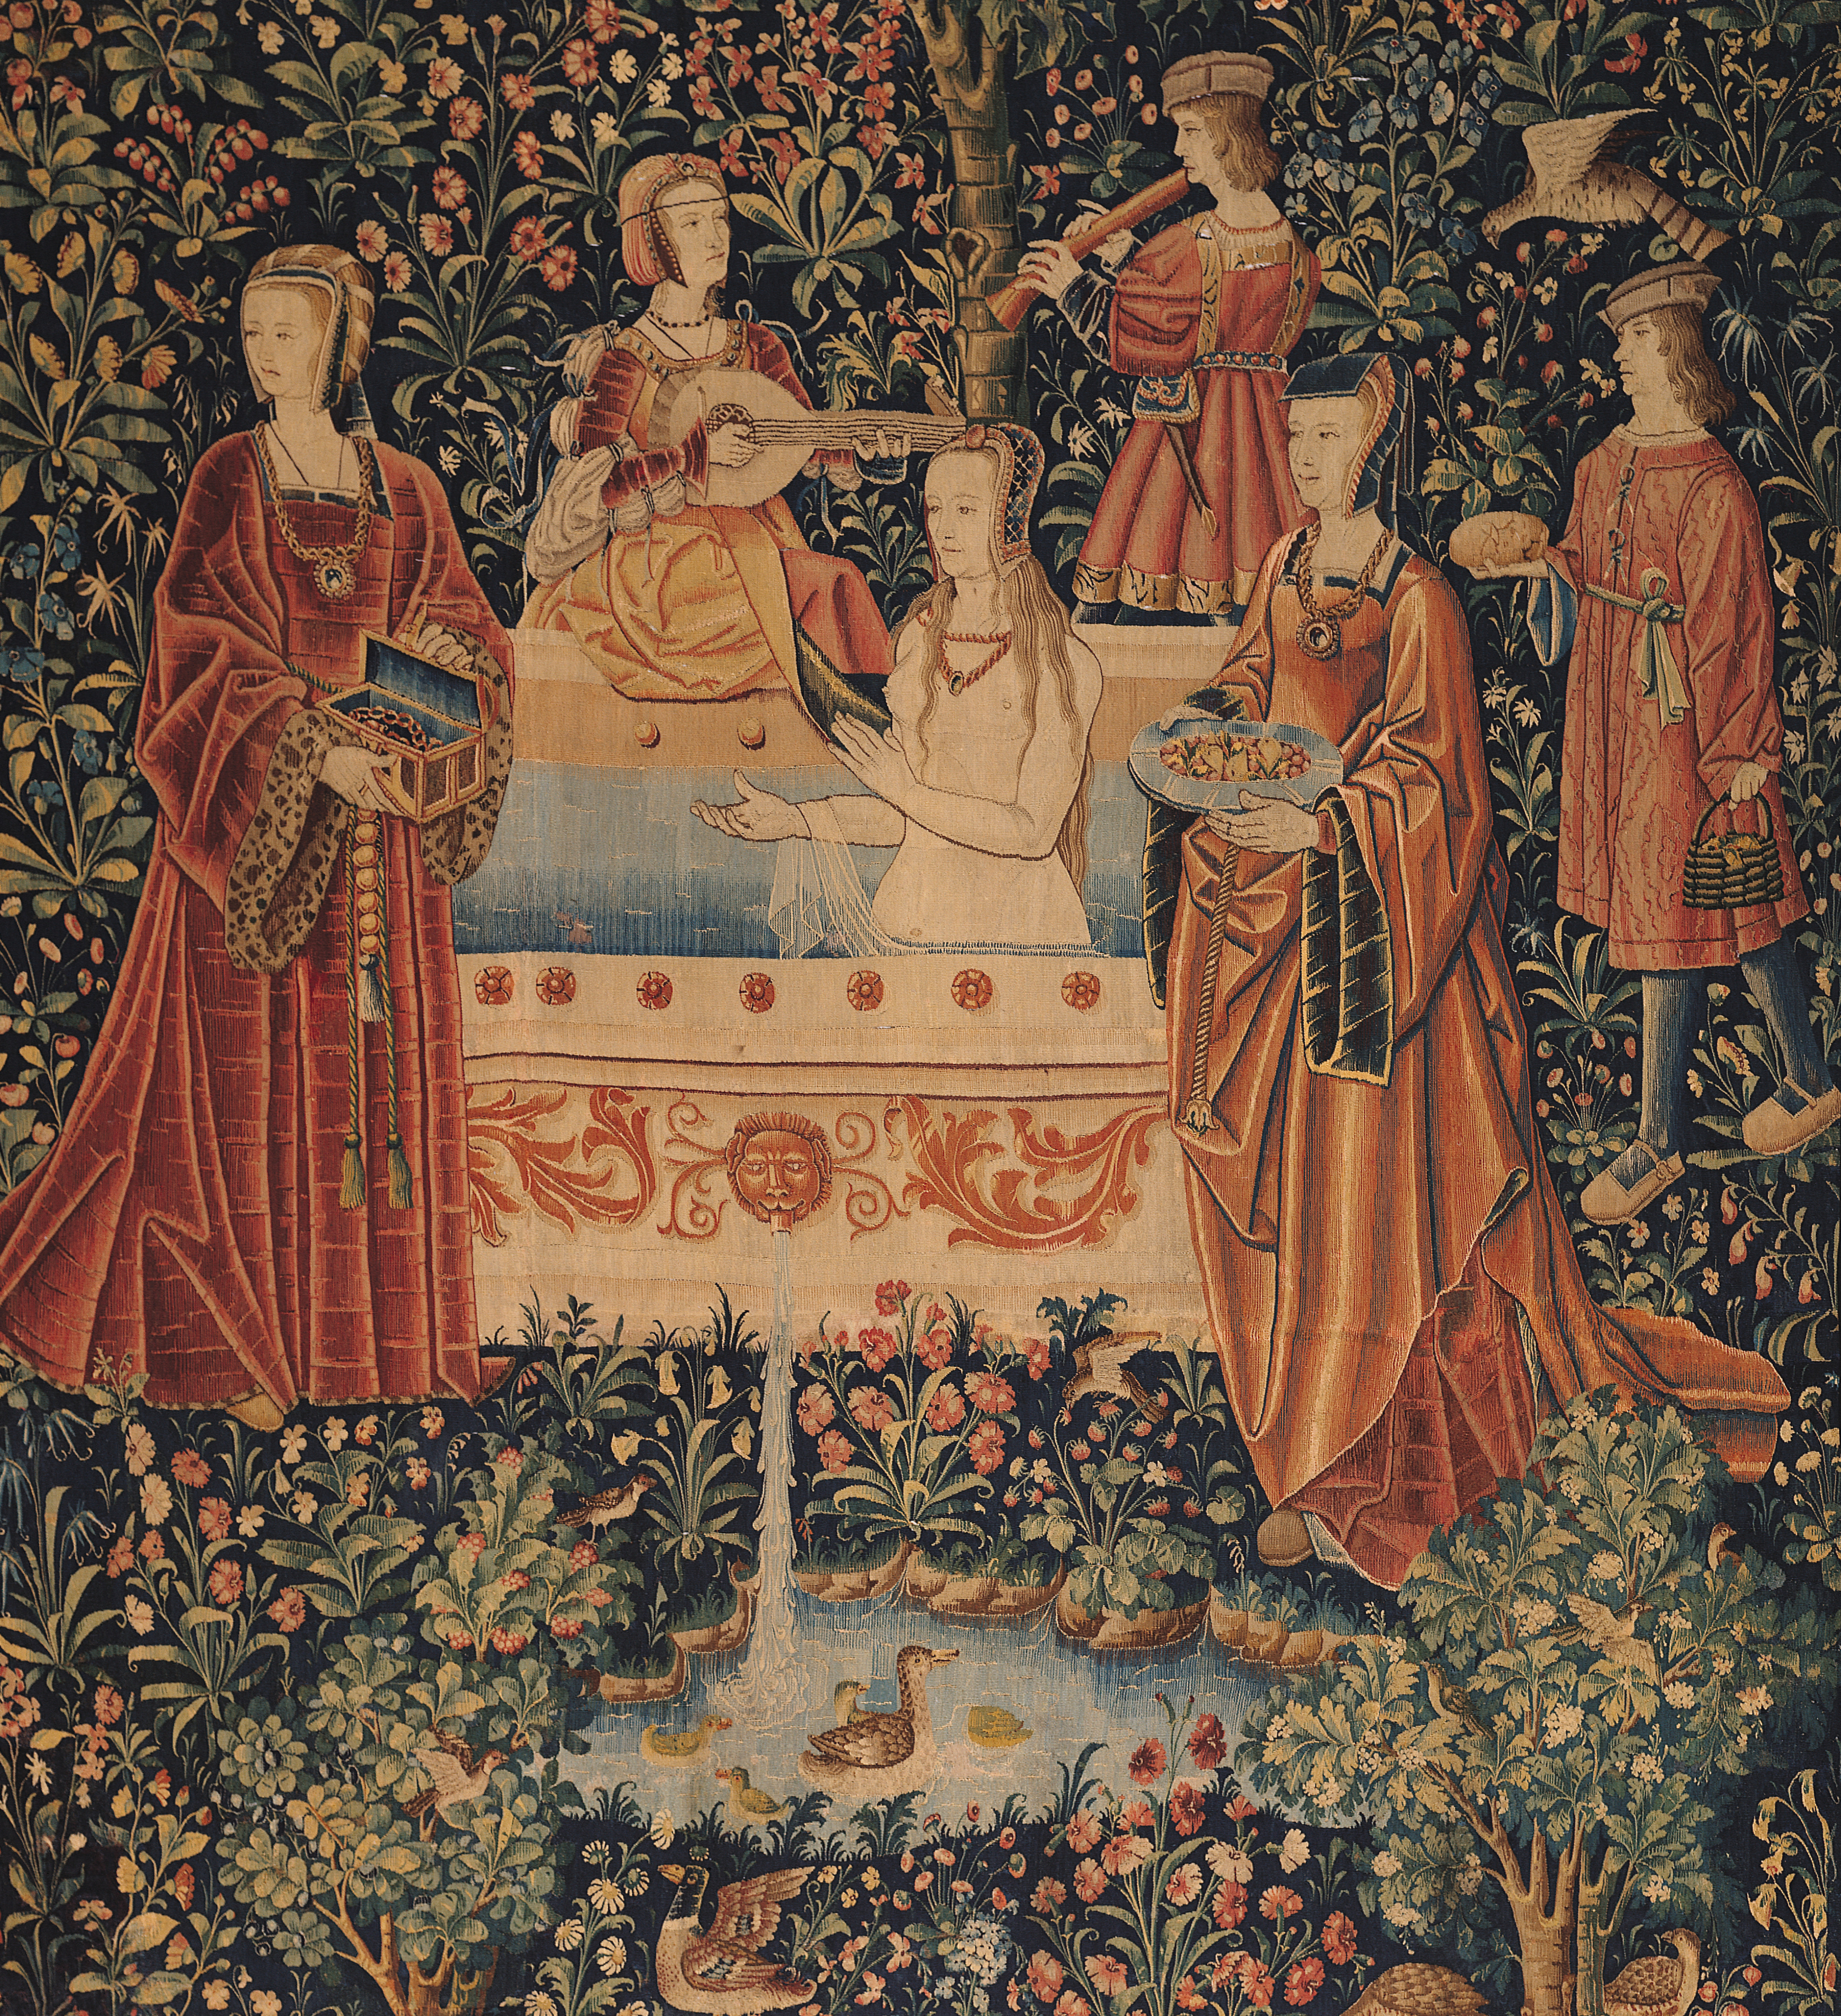 An old rendering of a woman in a bath being tended to by her servants